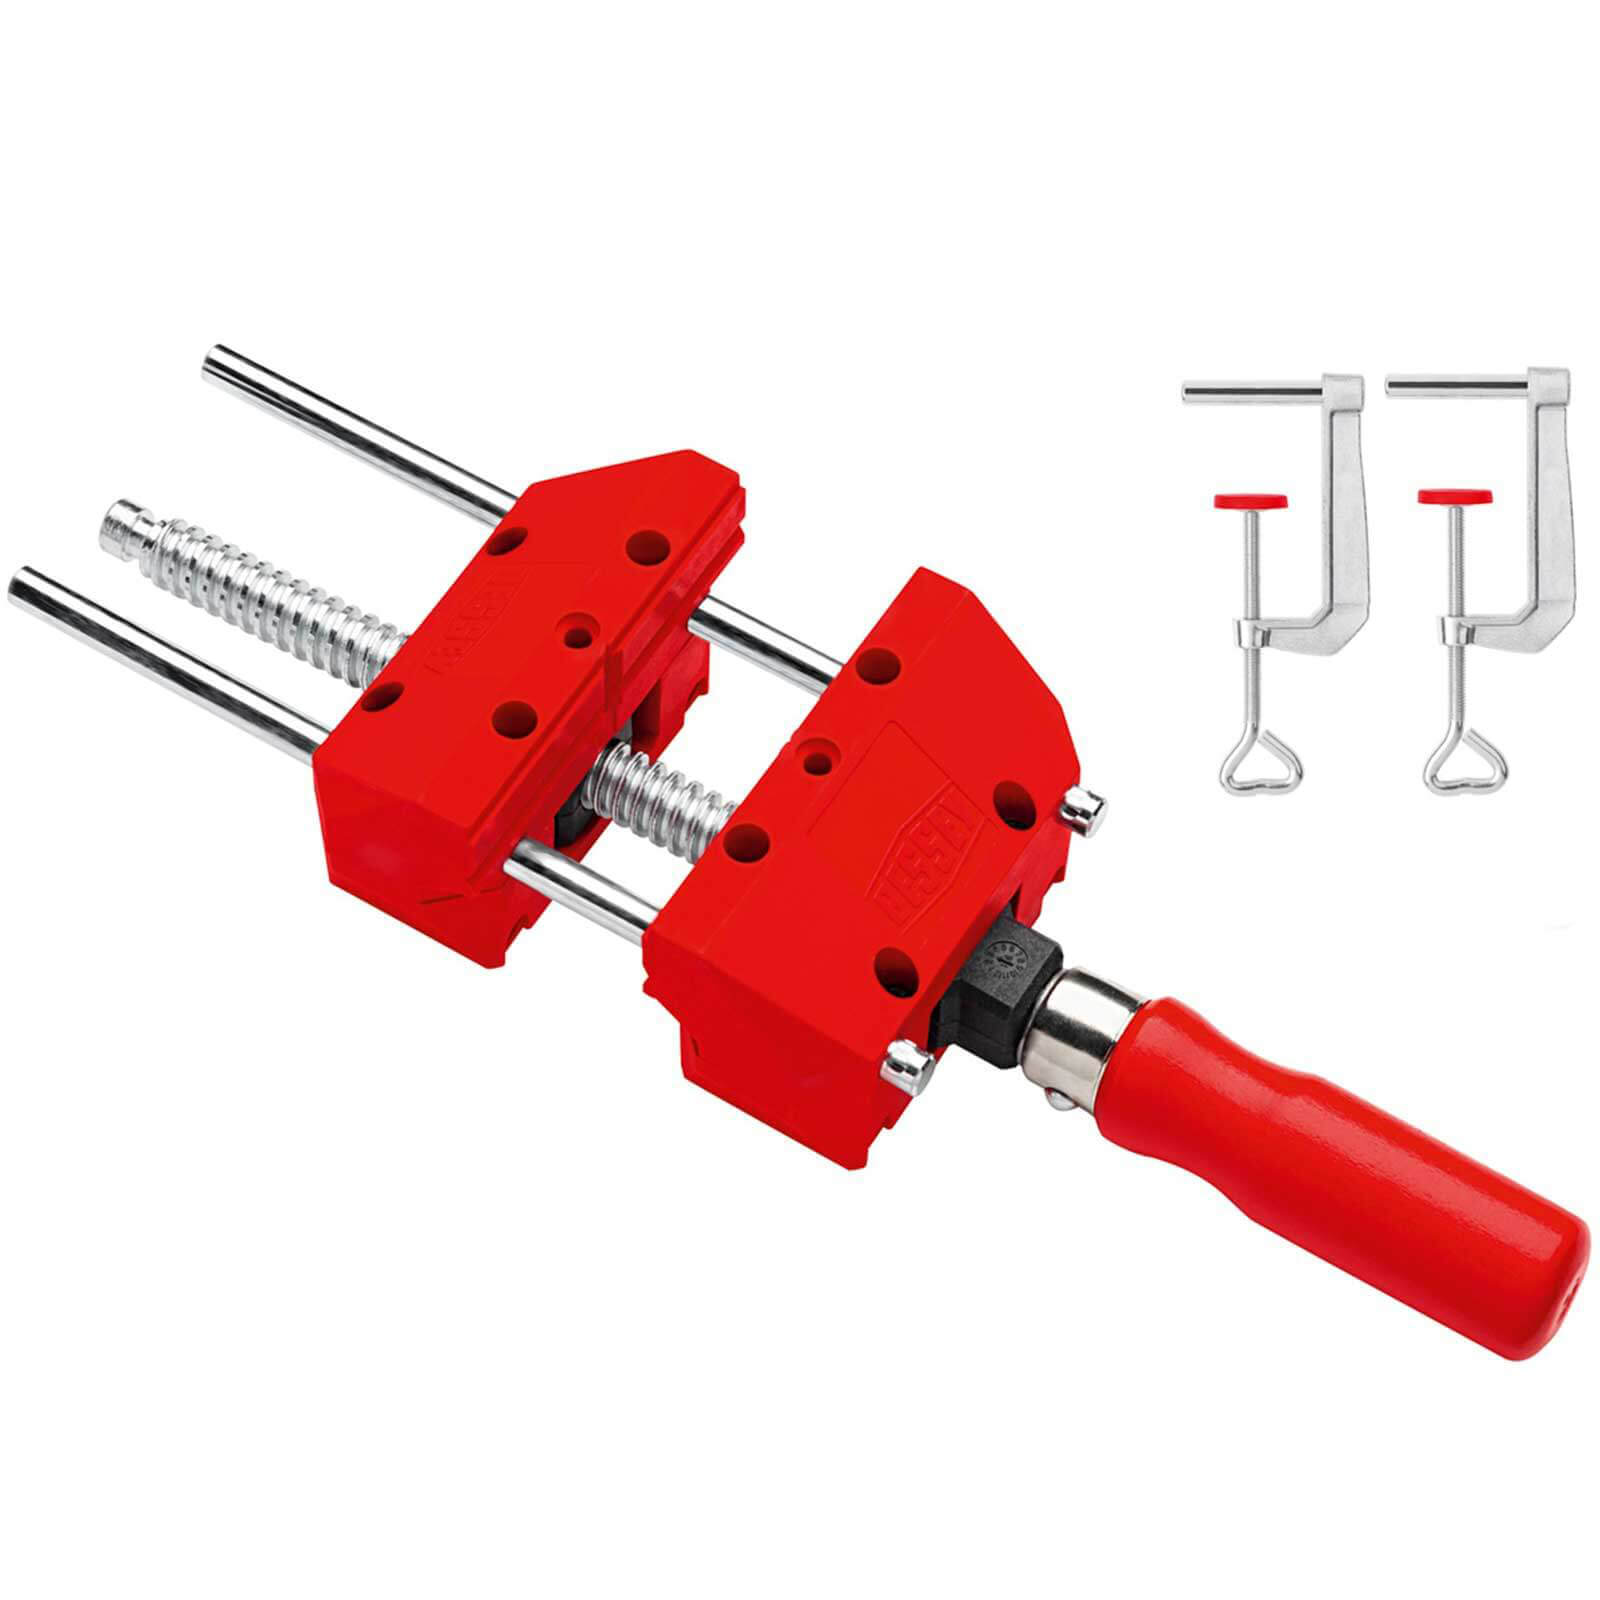 Photo of Bessey S10-st Soft Faced Mini Vice